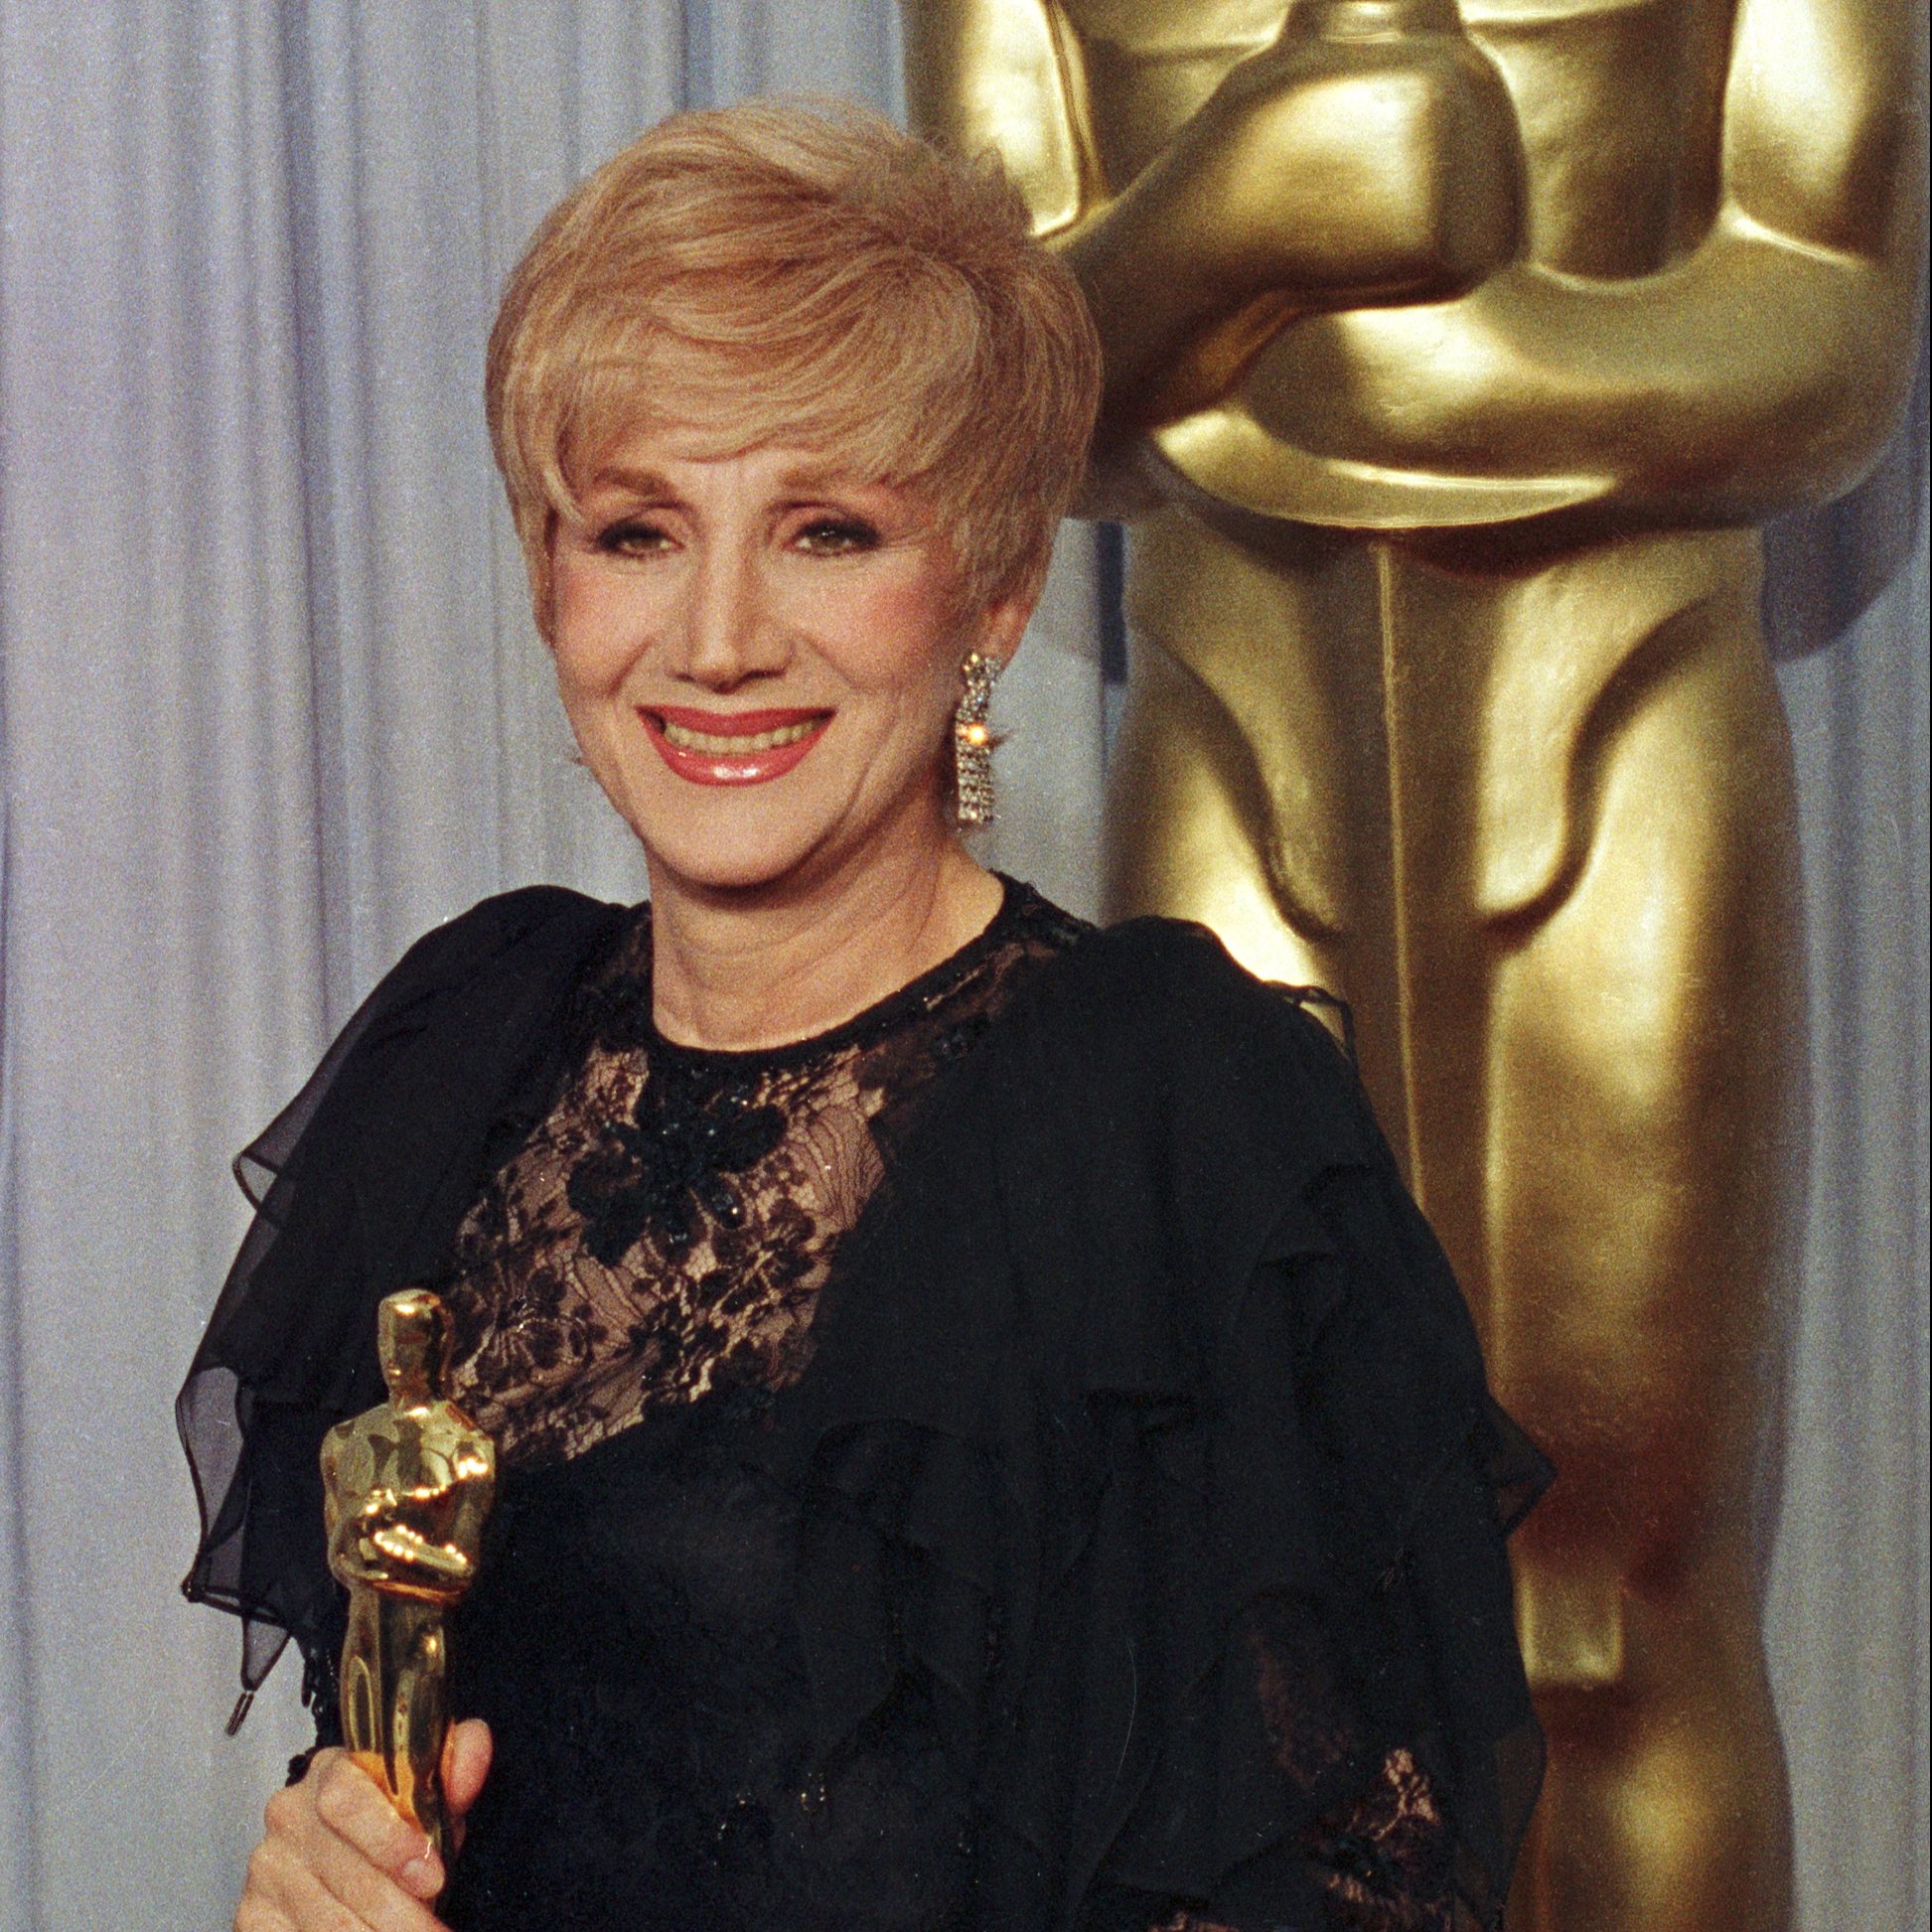 The actress in 1988